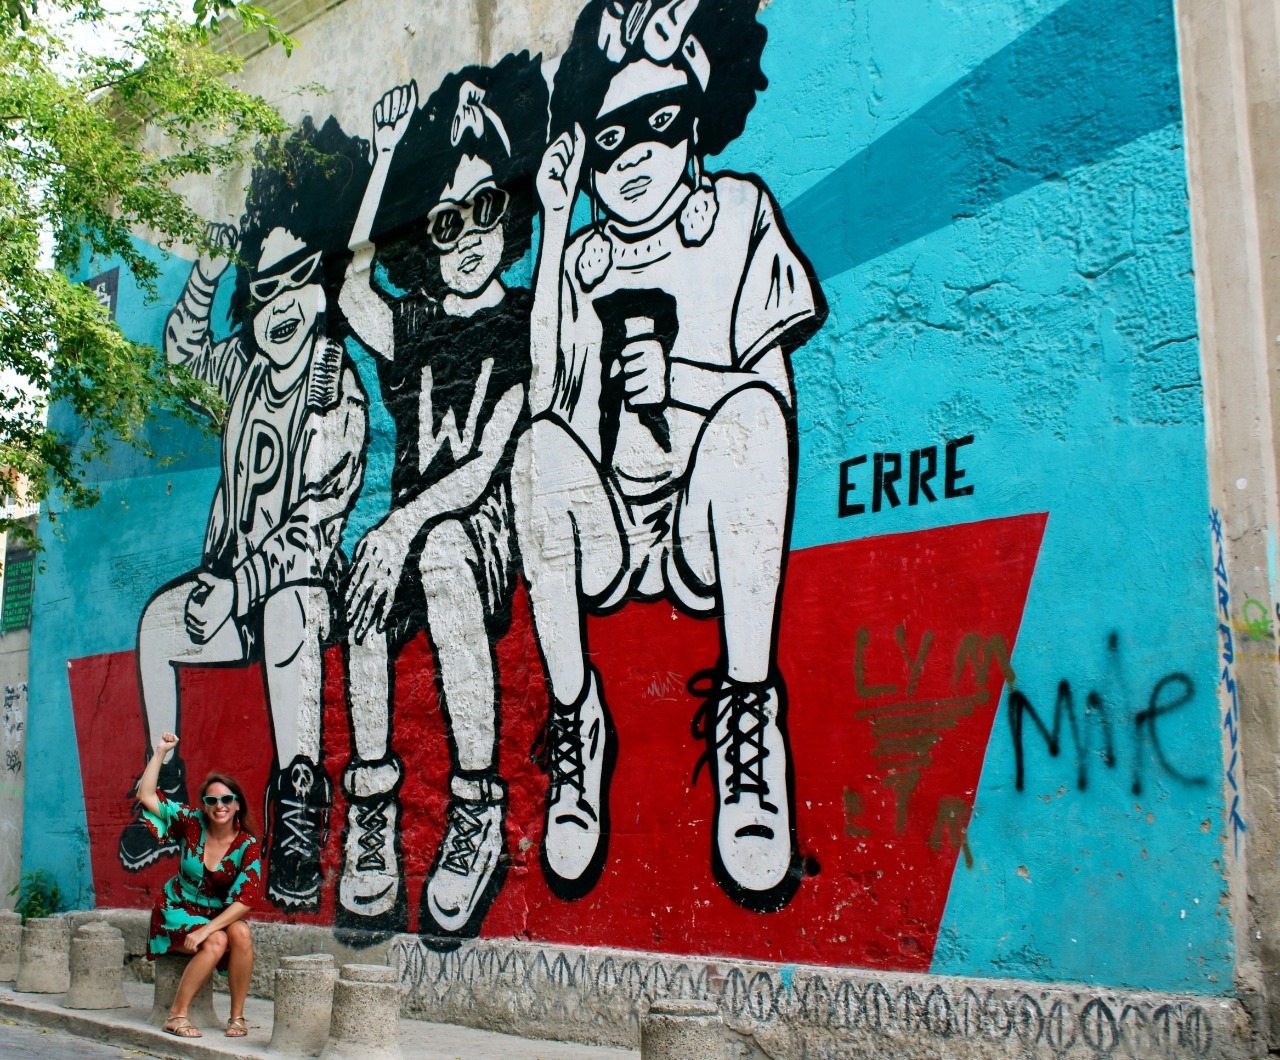 Ashley Lawson posing in front of a mural in Erre. The mural shows three black girls sitting on a red ledge with fists raised casually